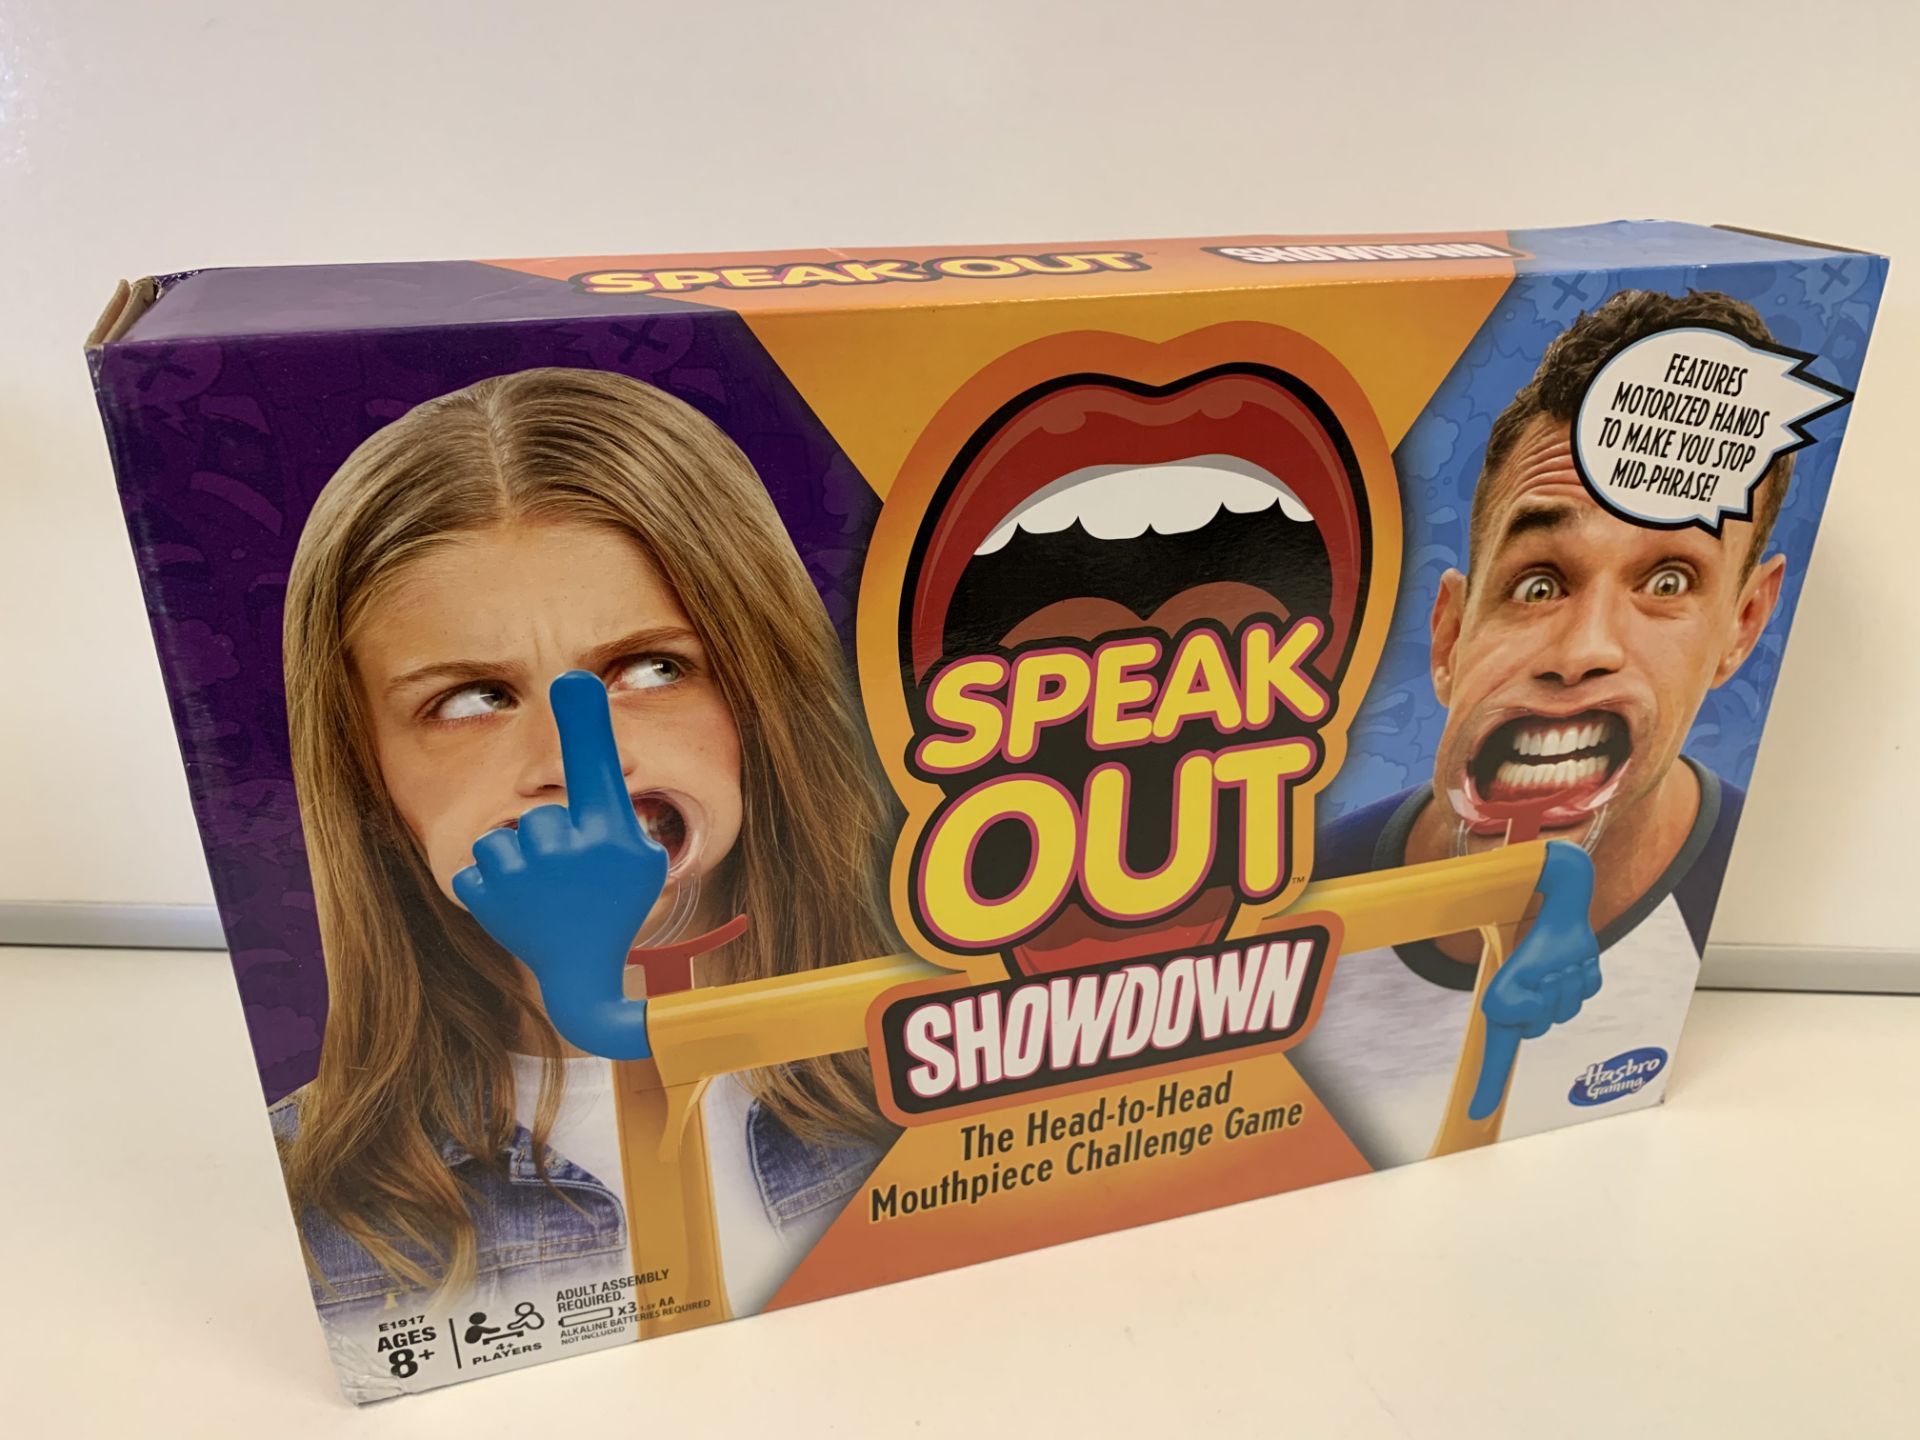 12 X BRAND NEW HASBRO GAMING SPEAK OUT SHOWDOWN THE HEAD TO HEAD MOUTHPIECE CHALLENGE GAME